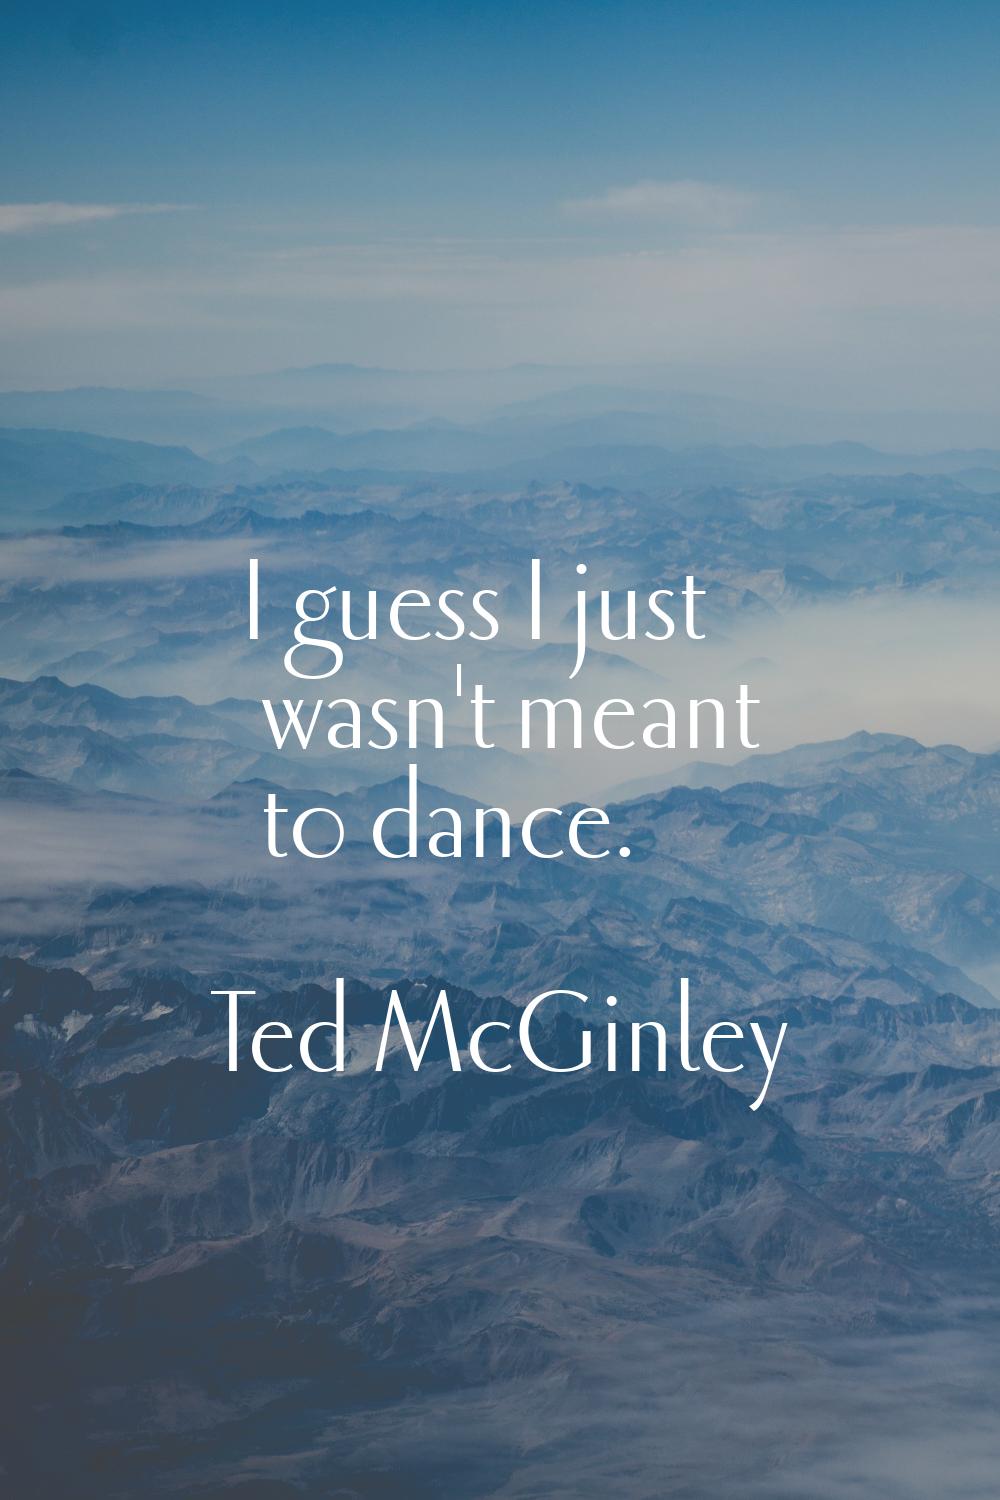 I guess I just wasn't meant to dance.